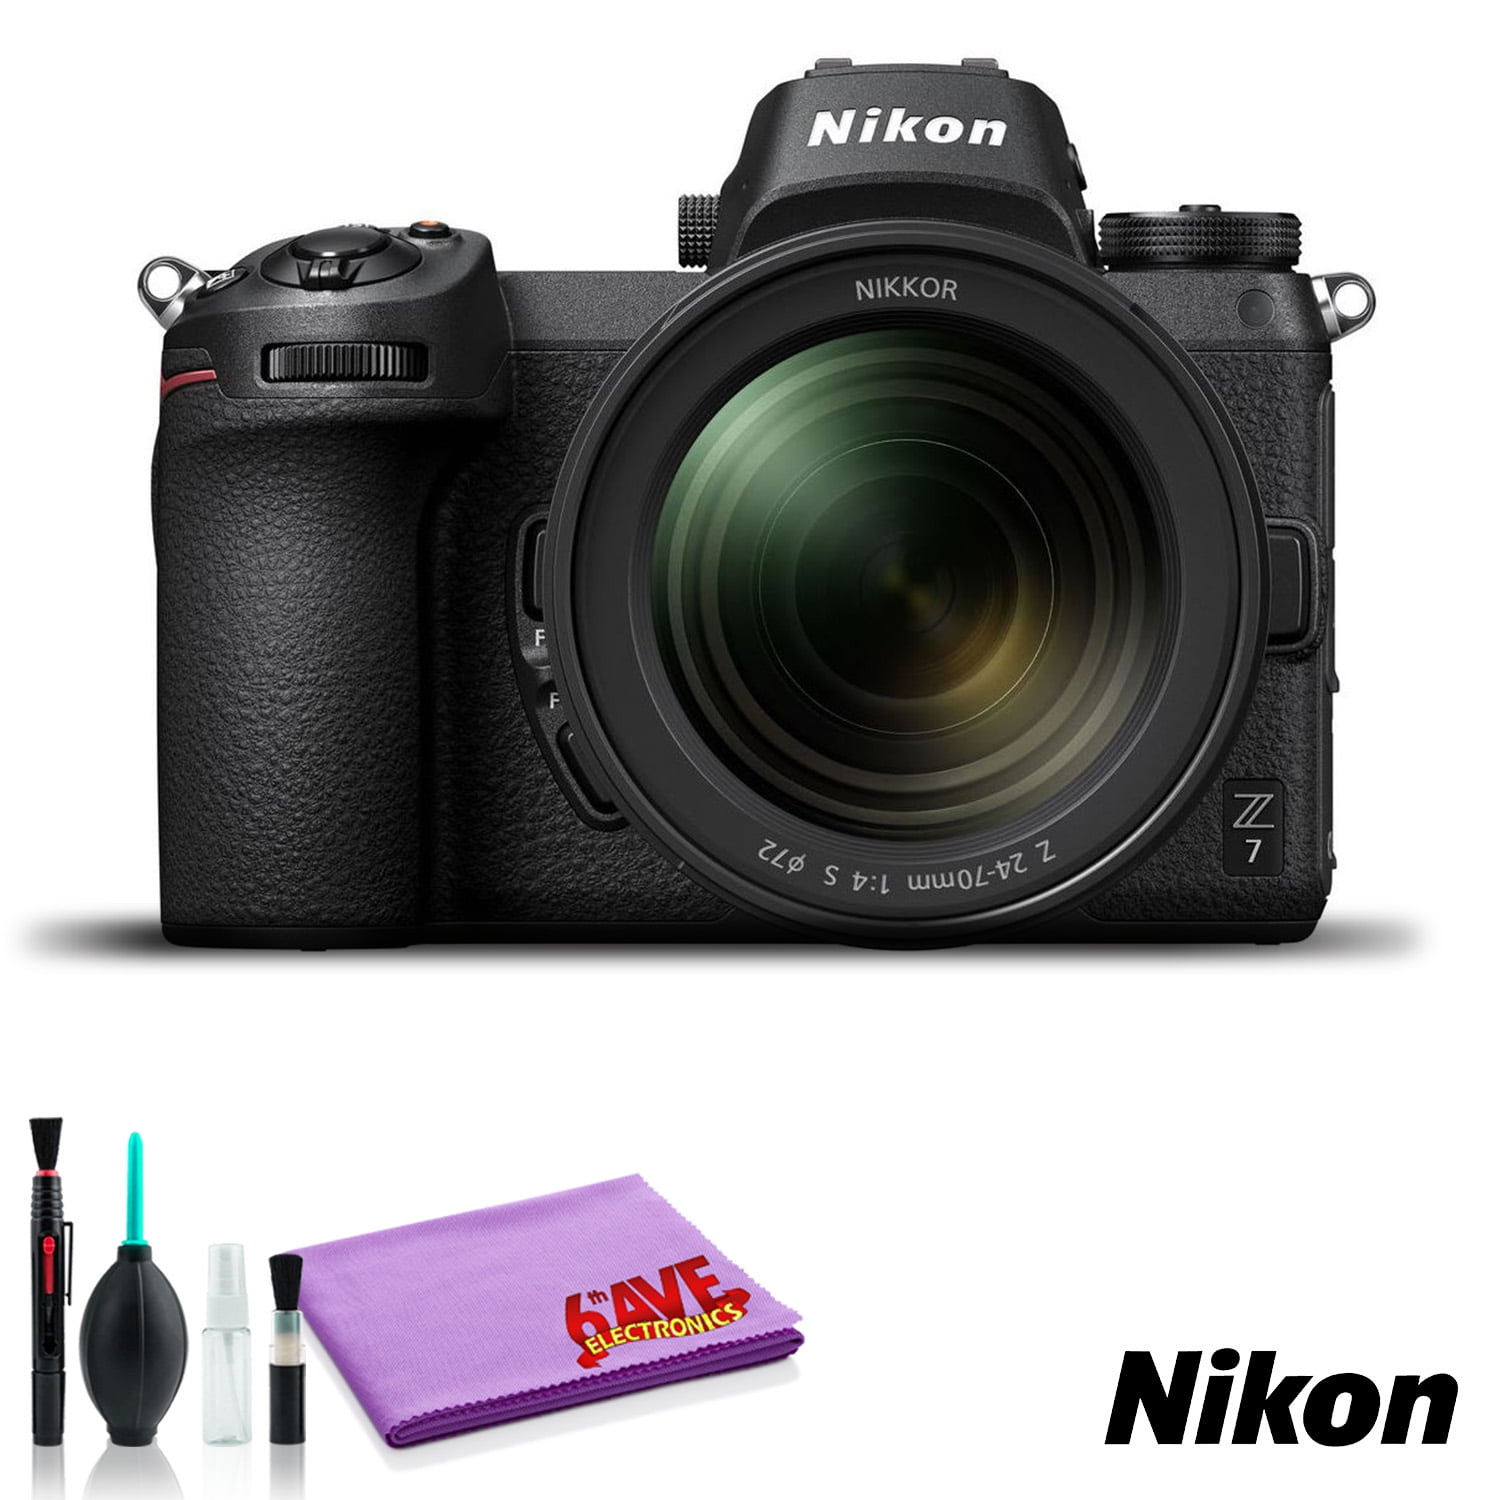 Nikon Z 7 Mirrorless Digital Camera with 24-70mm Lens (Intl Model) - with Cleaning Kit - image 1 of 5